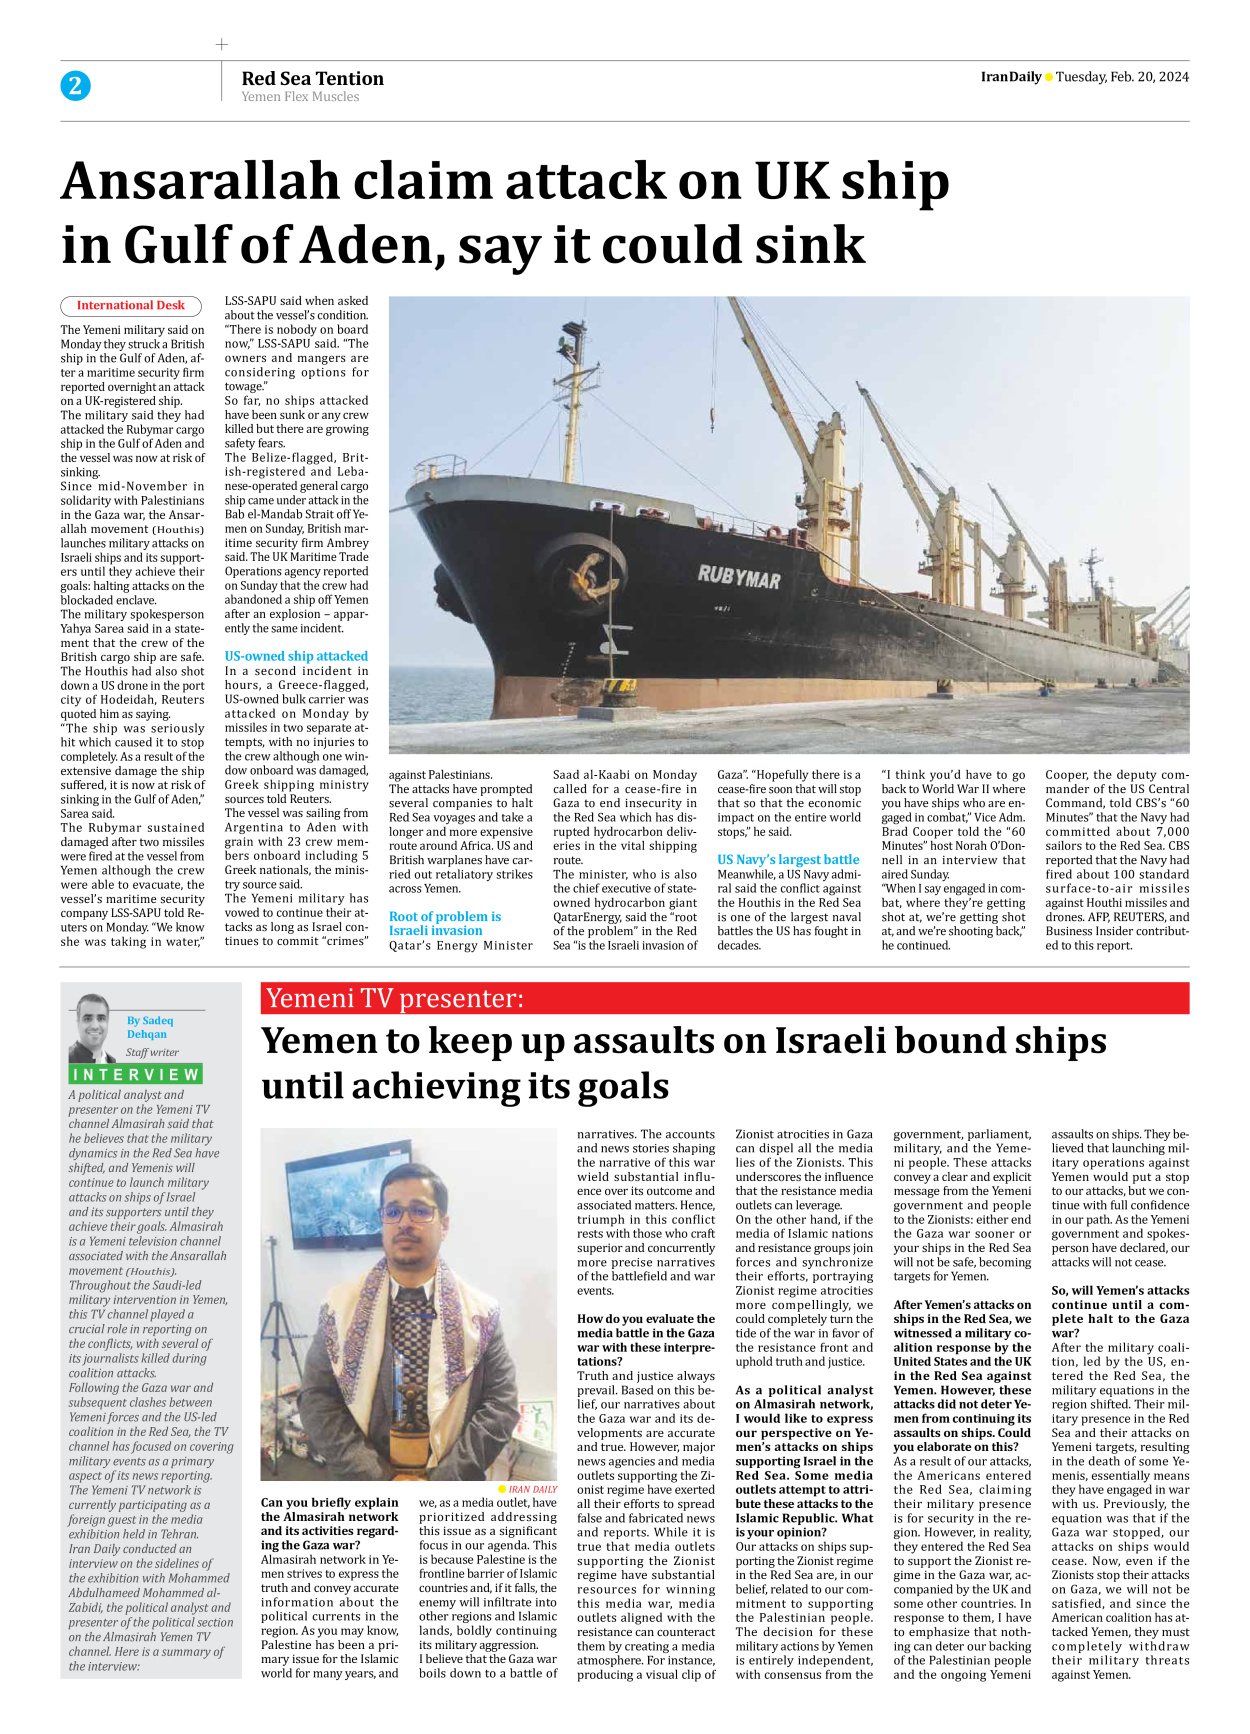 Iran Daily - Number Seven Thousand Five Hundred and Twelve - 20 February 2024 - Page 2